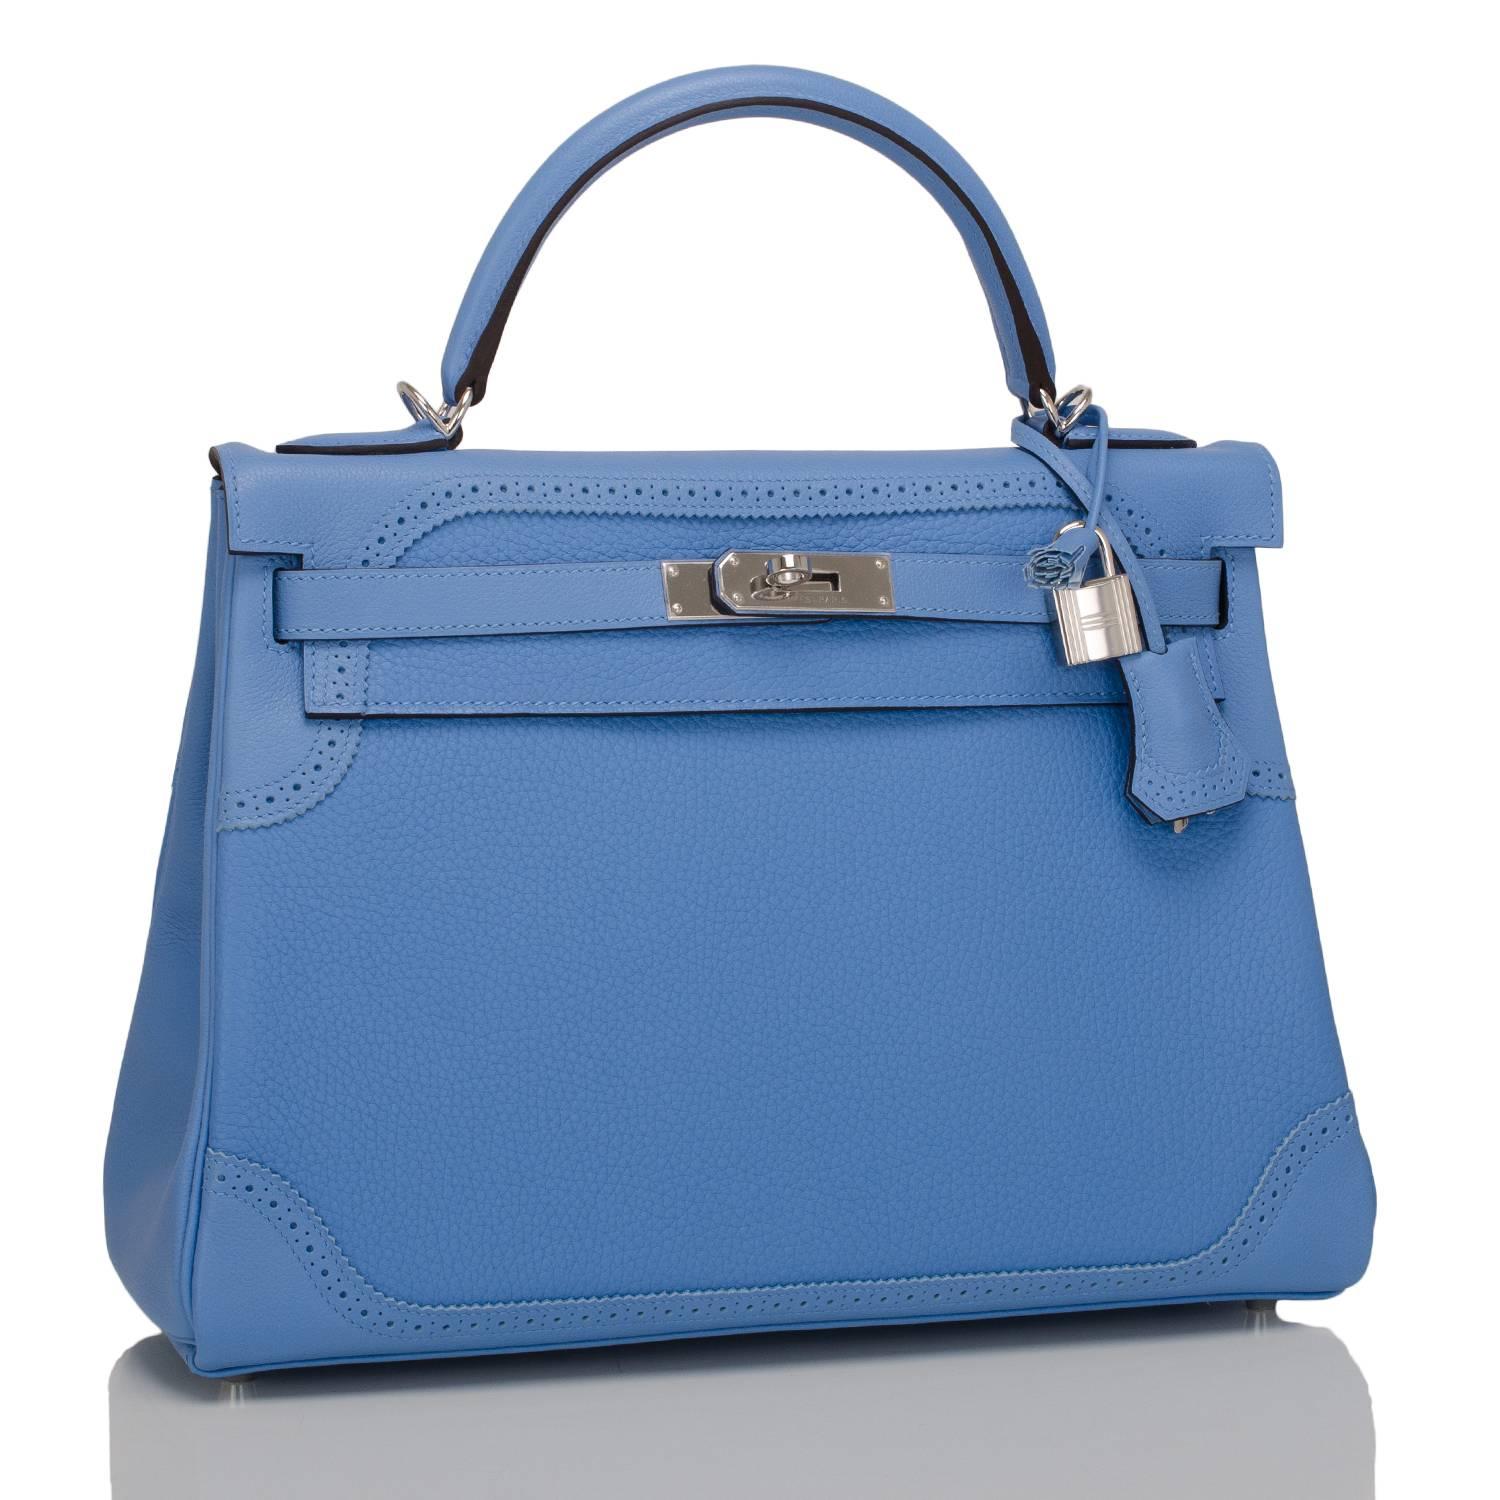 Hermes Blue Paradise Ghillies Kelly 32cm of clemence leather with palladium hardware.

This Kelly has a broguing and serration sinuous pattern at top and bottom, tonal stitching, a front toggle closure, a clochette with lock and two keys, and